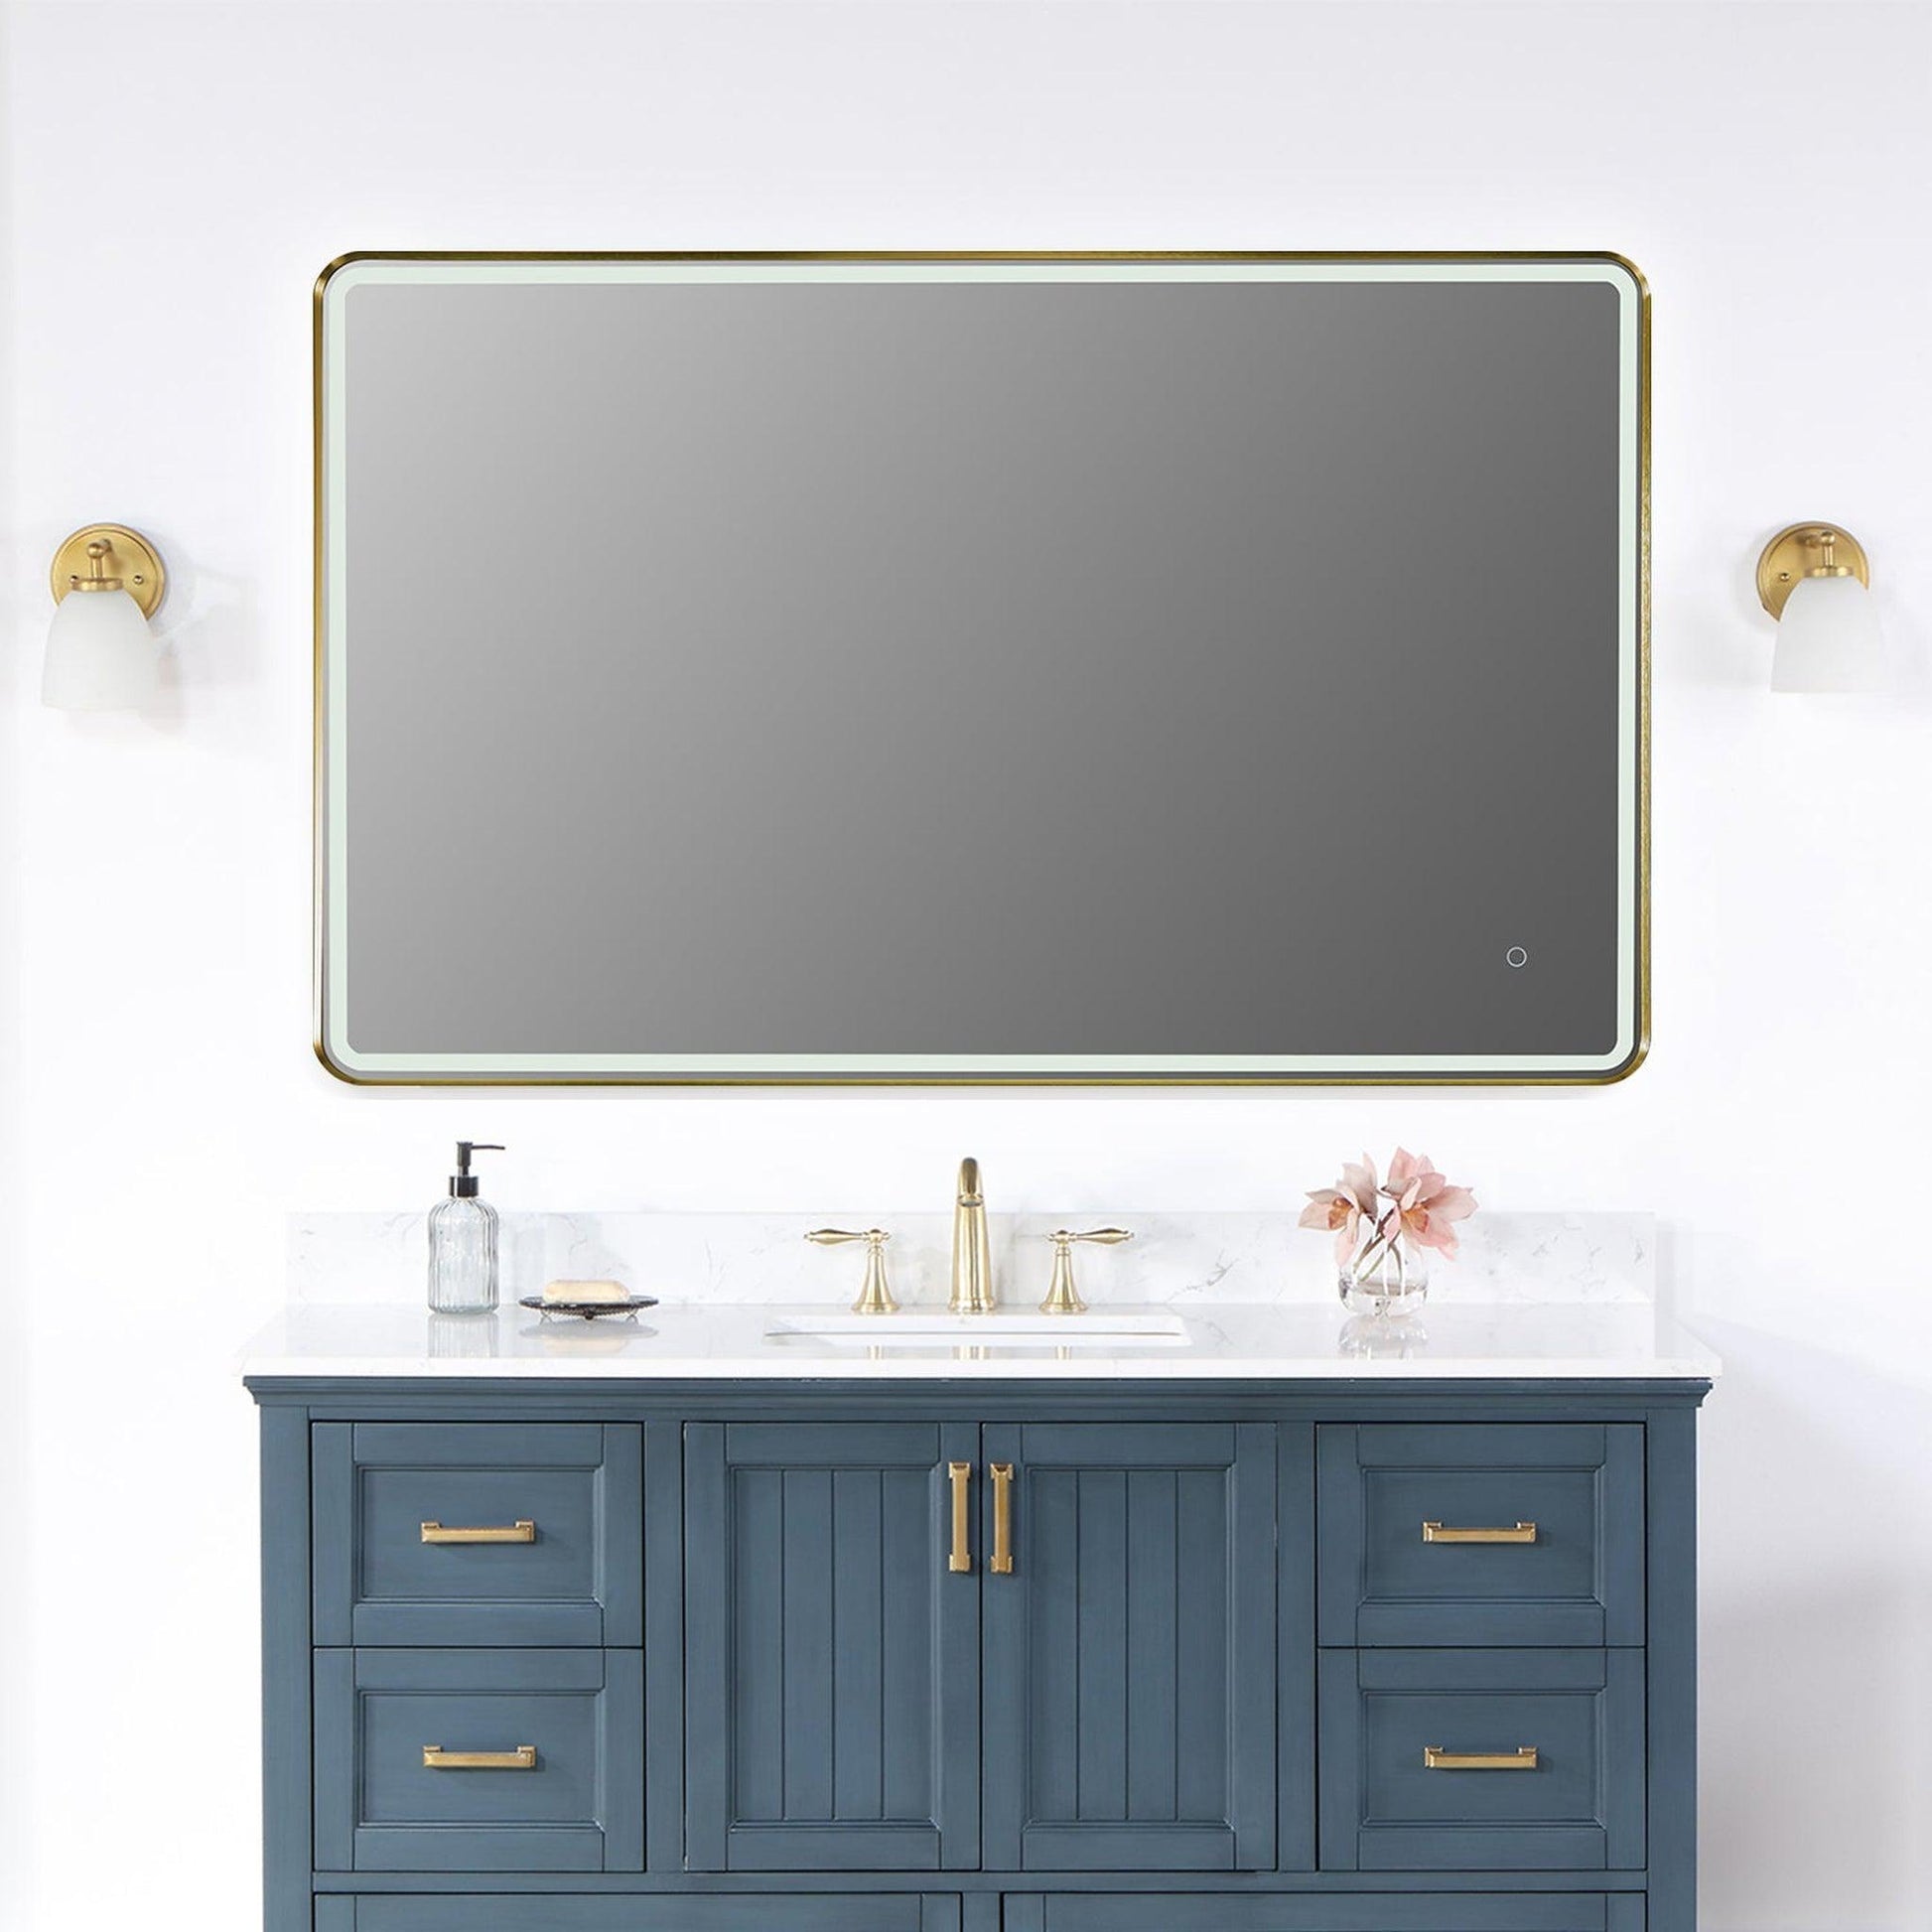 Altair Viaggi 48" Rectangle Brushed Gold Wall-Mounted LED Mirror